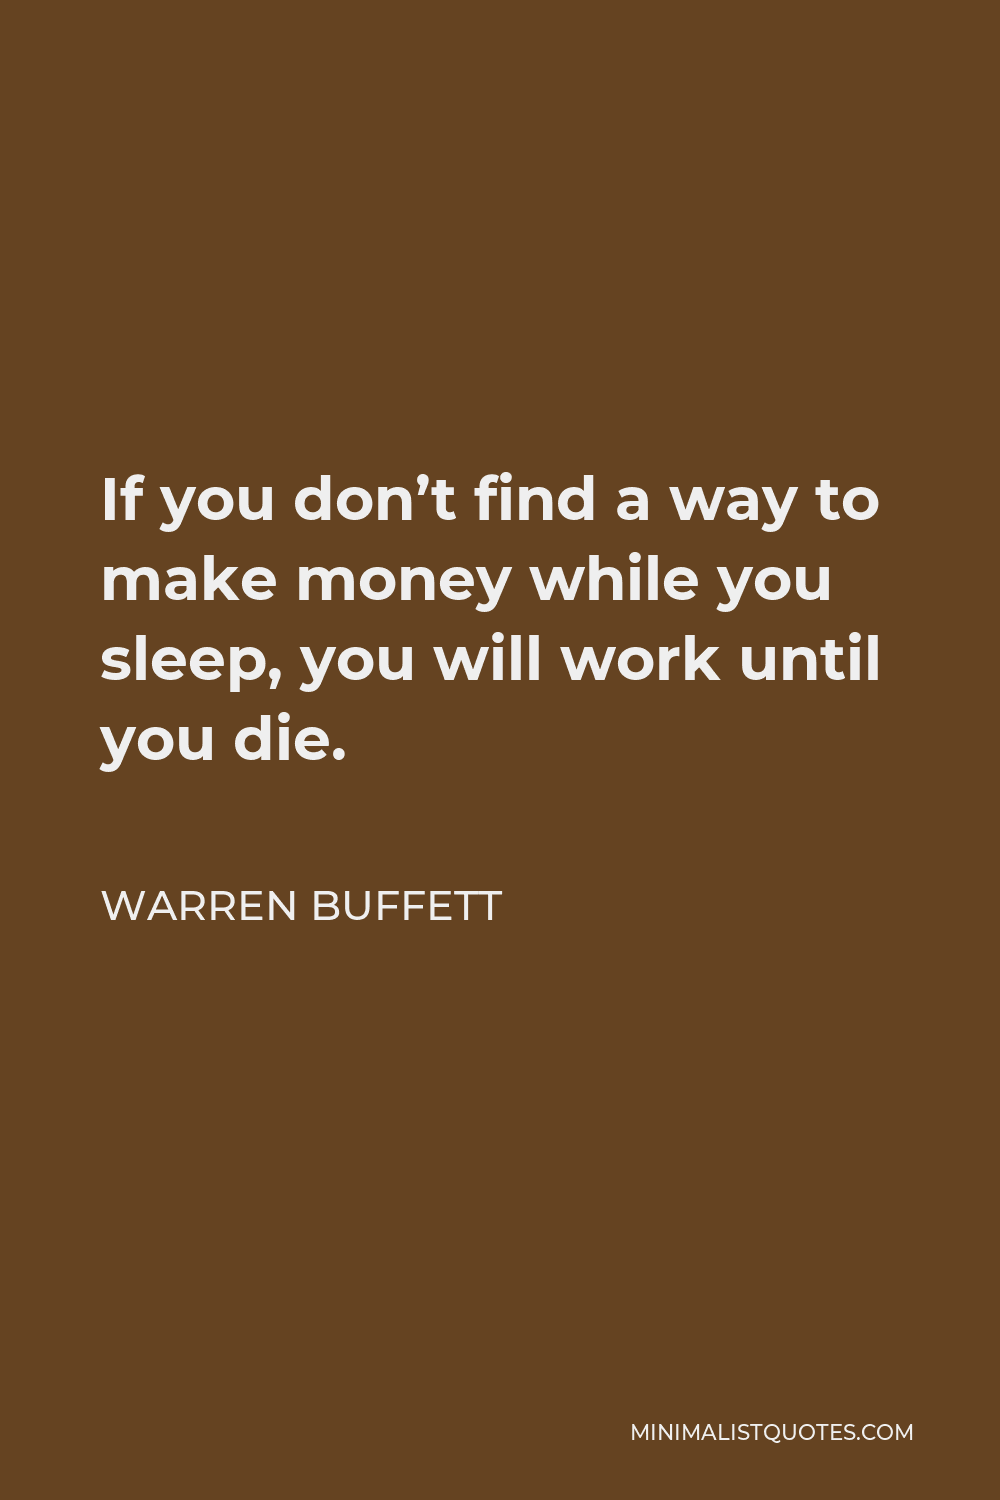 Warren Buffett Quote - If you don’t find a way to make money while you sleep, you will work until you die.